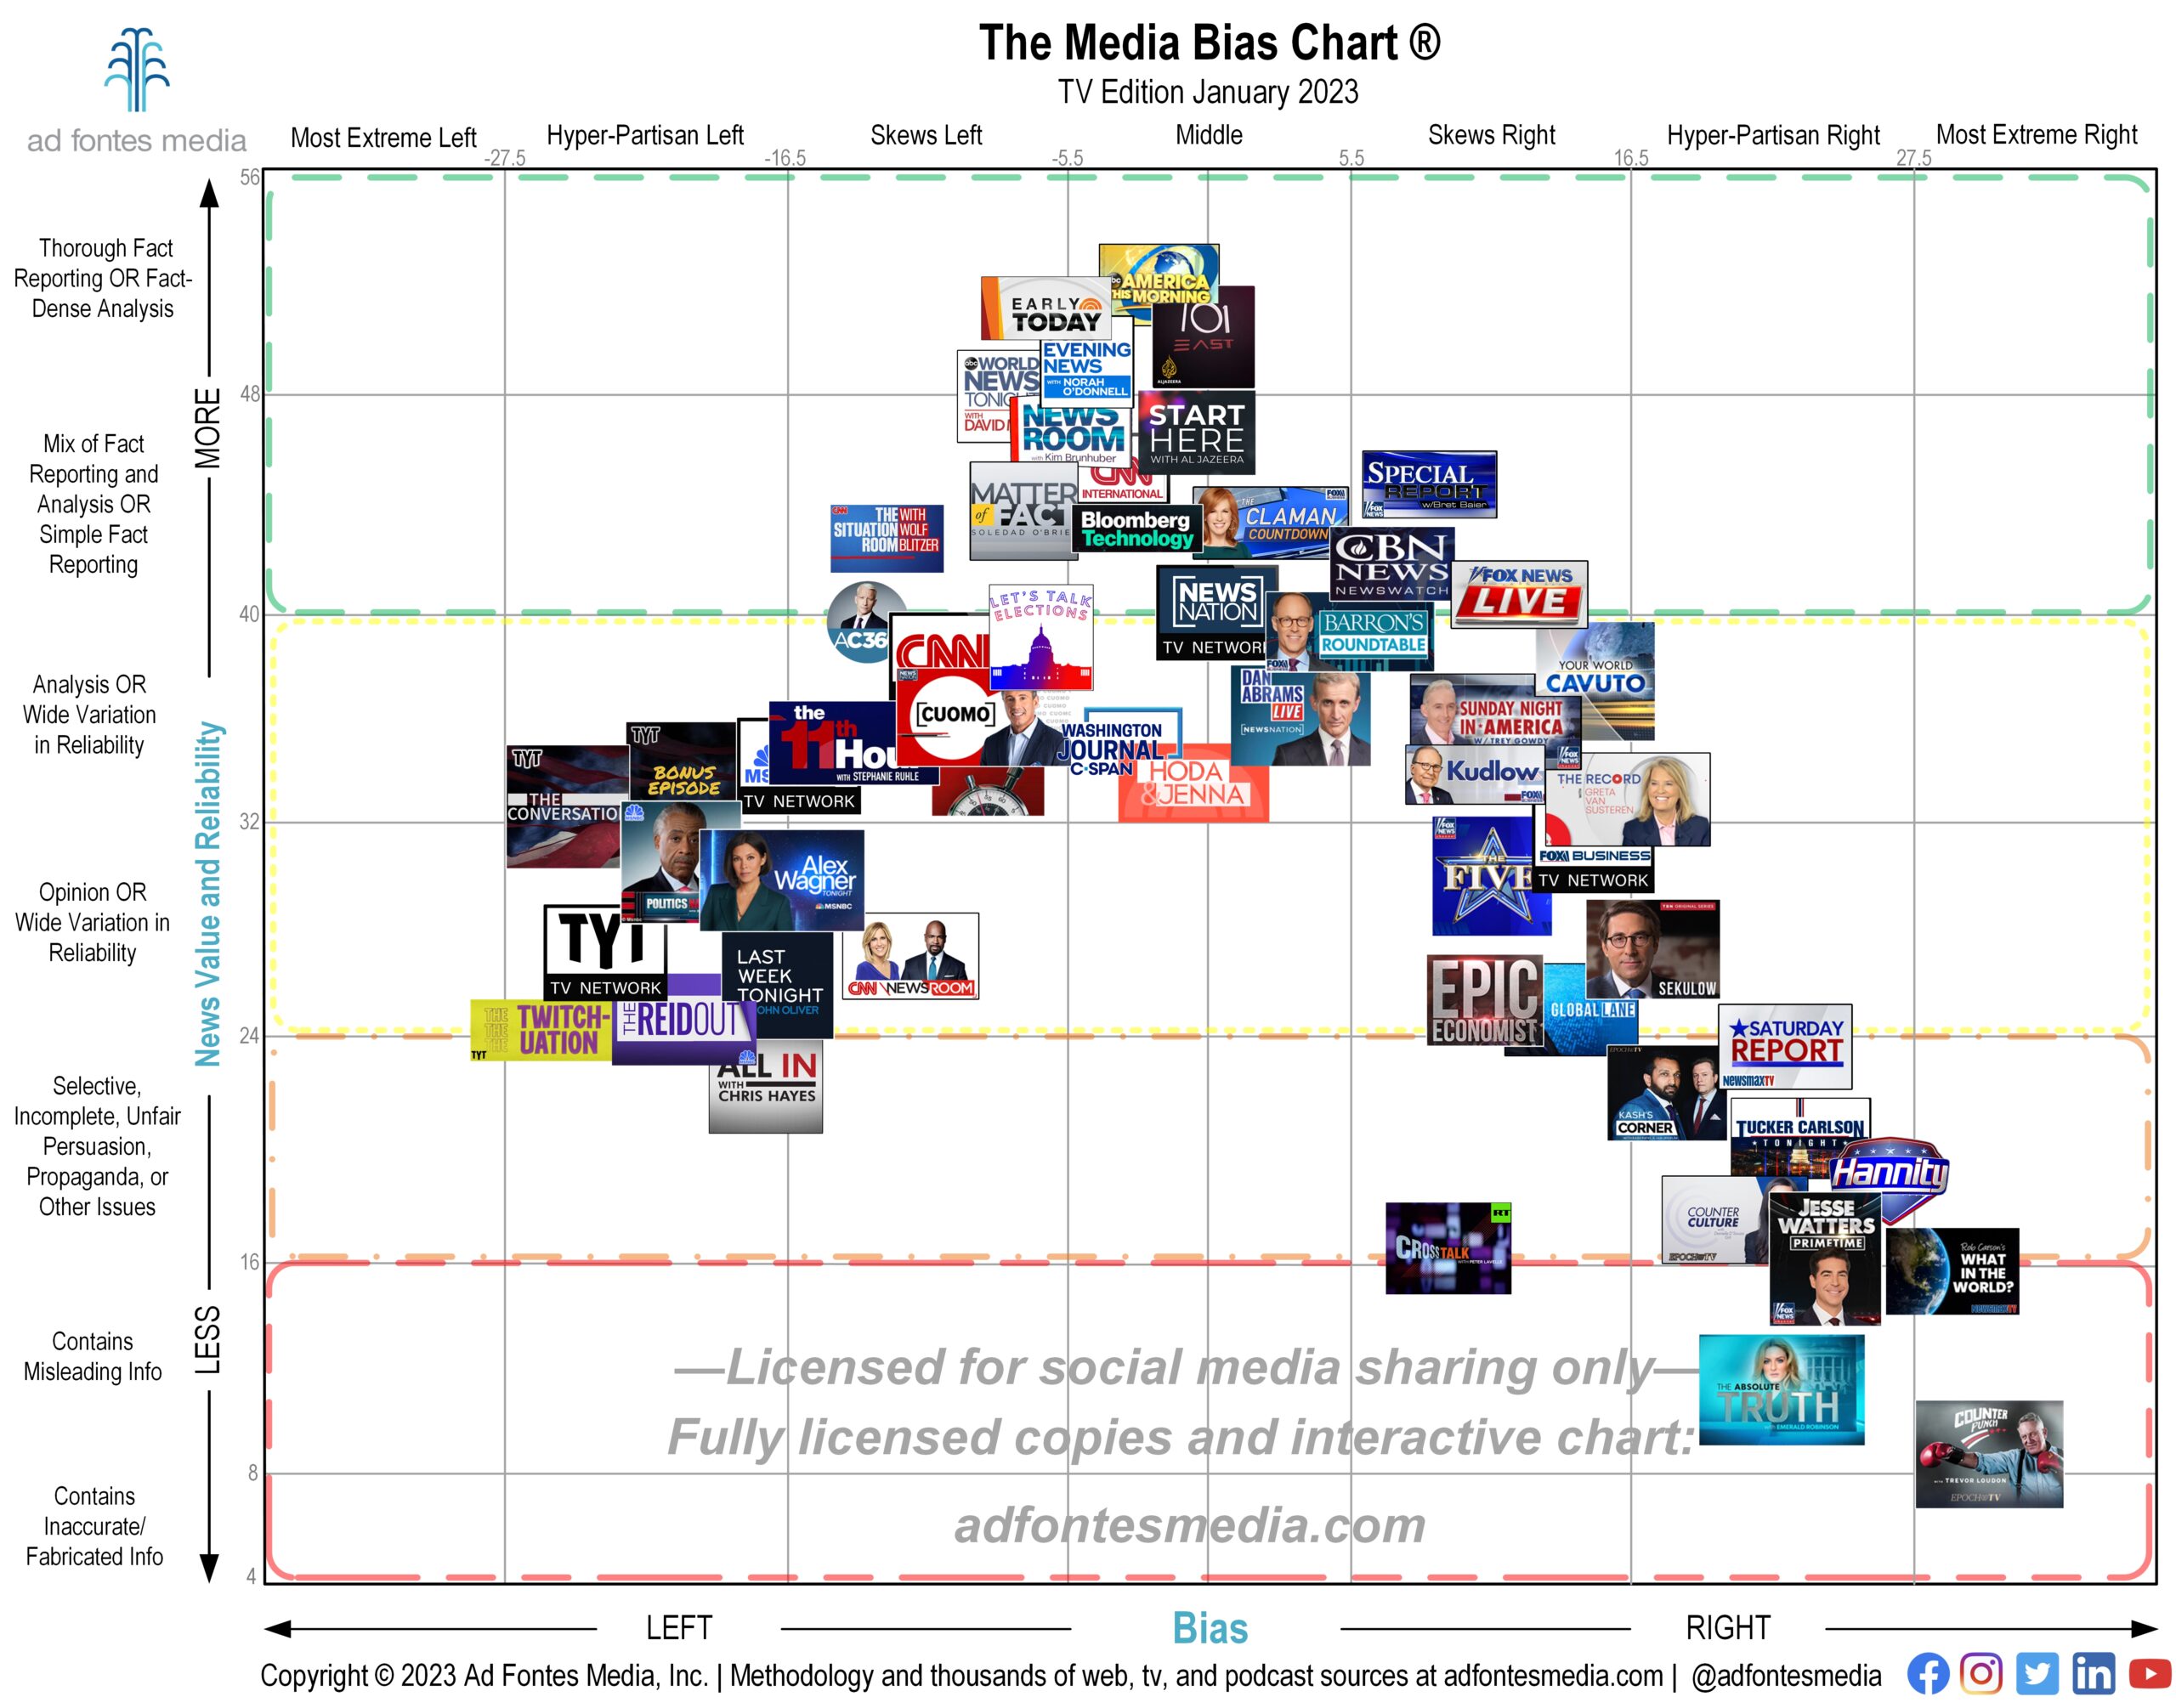 Unlicensed TV edition of the January 2023 Media Bias Chart